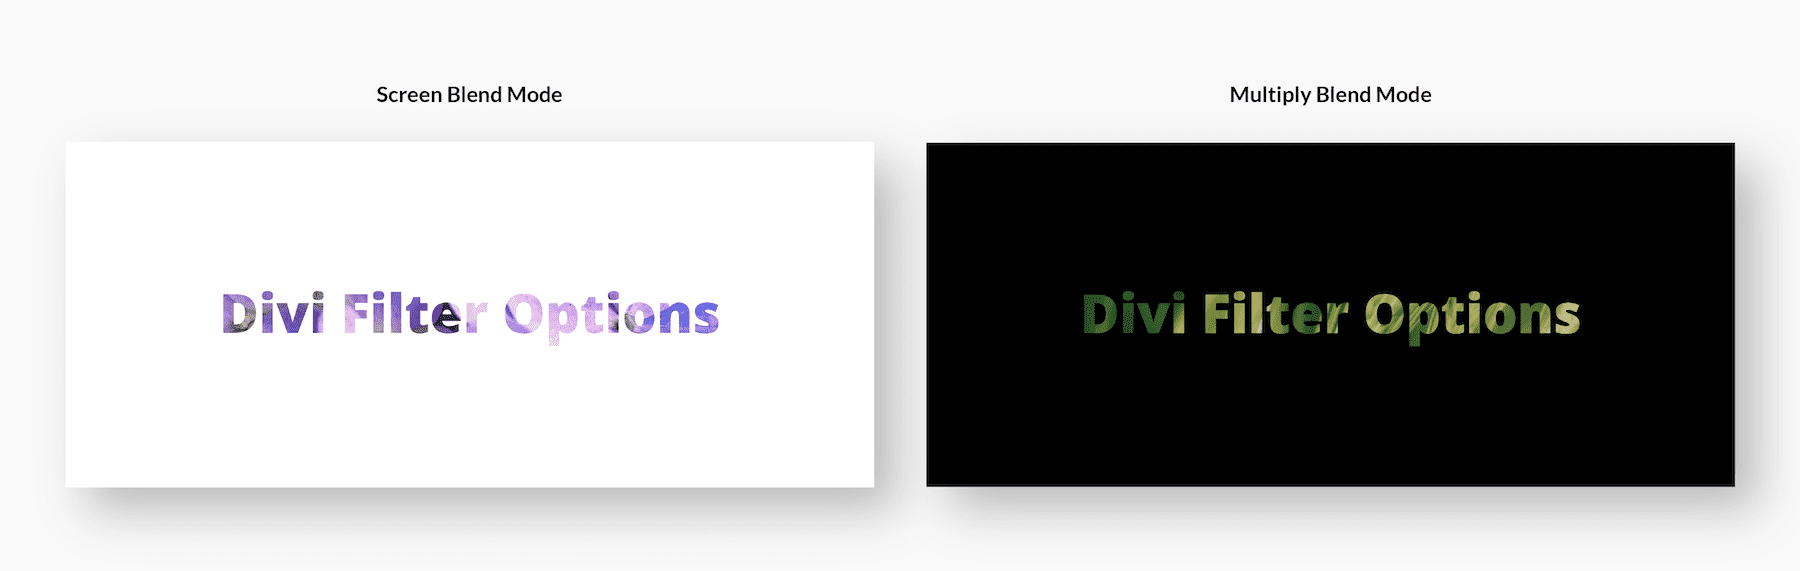 How to use Divi Filter and Blend Mode Options